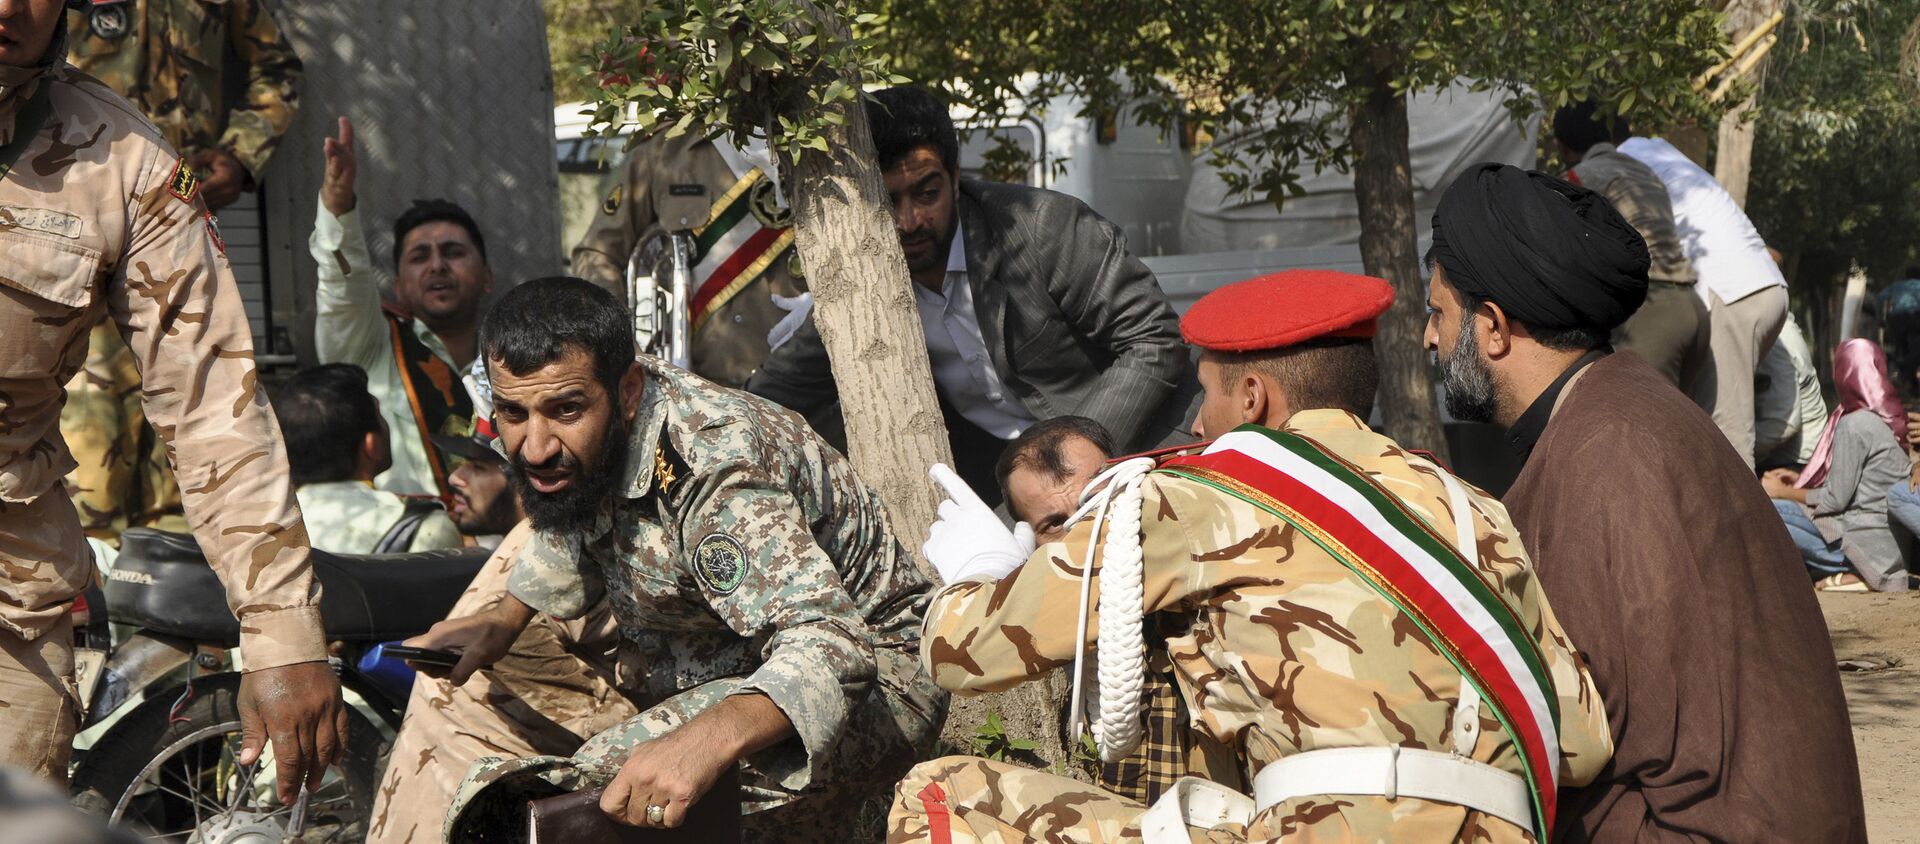 Iranian armed forces members and civilians take shelter in a shooting during a military parade marking the 38th anniversary of Iraq's 1980 invasion of Iran - Sputnik International, 1920, 25.09.2018